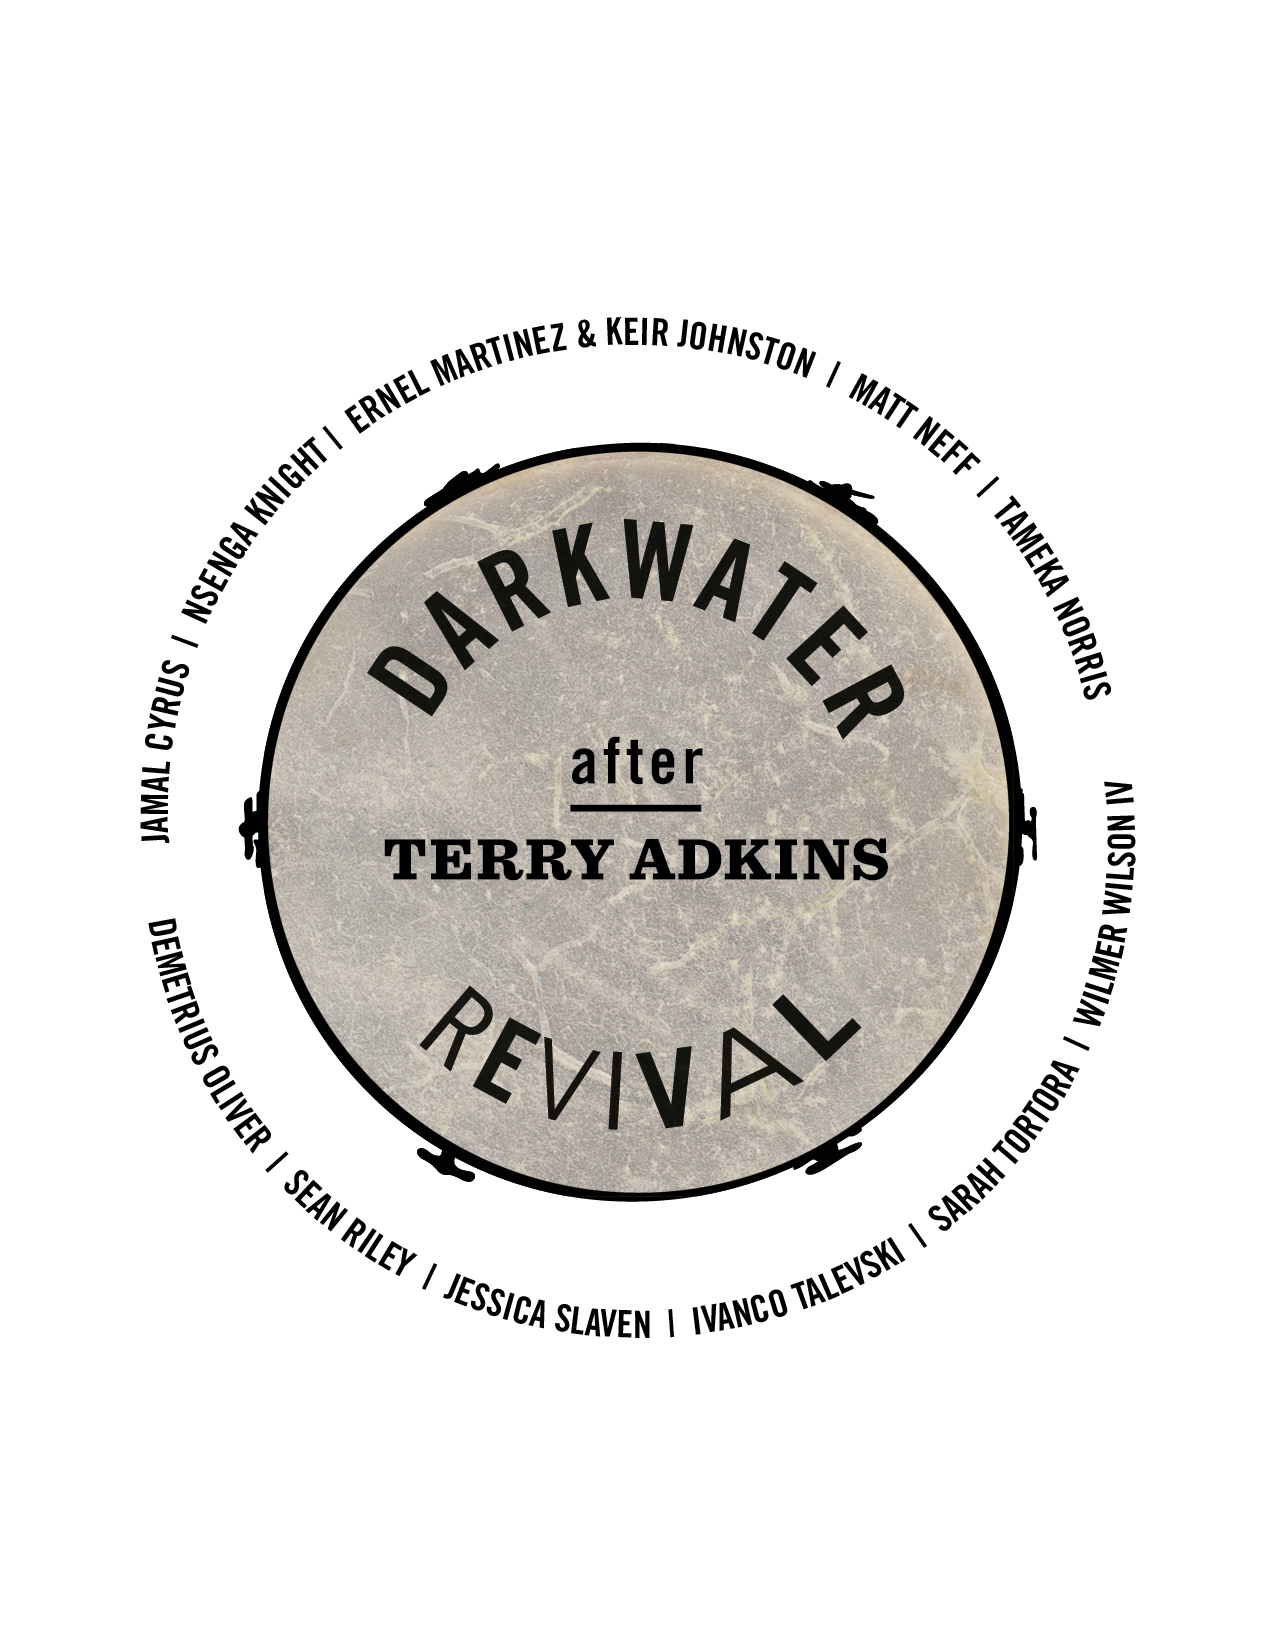 Darkwater Revival Logo with Artists